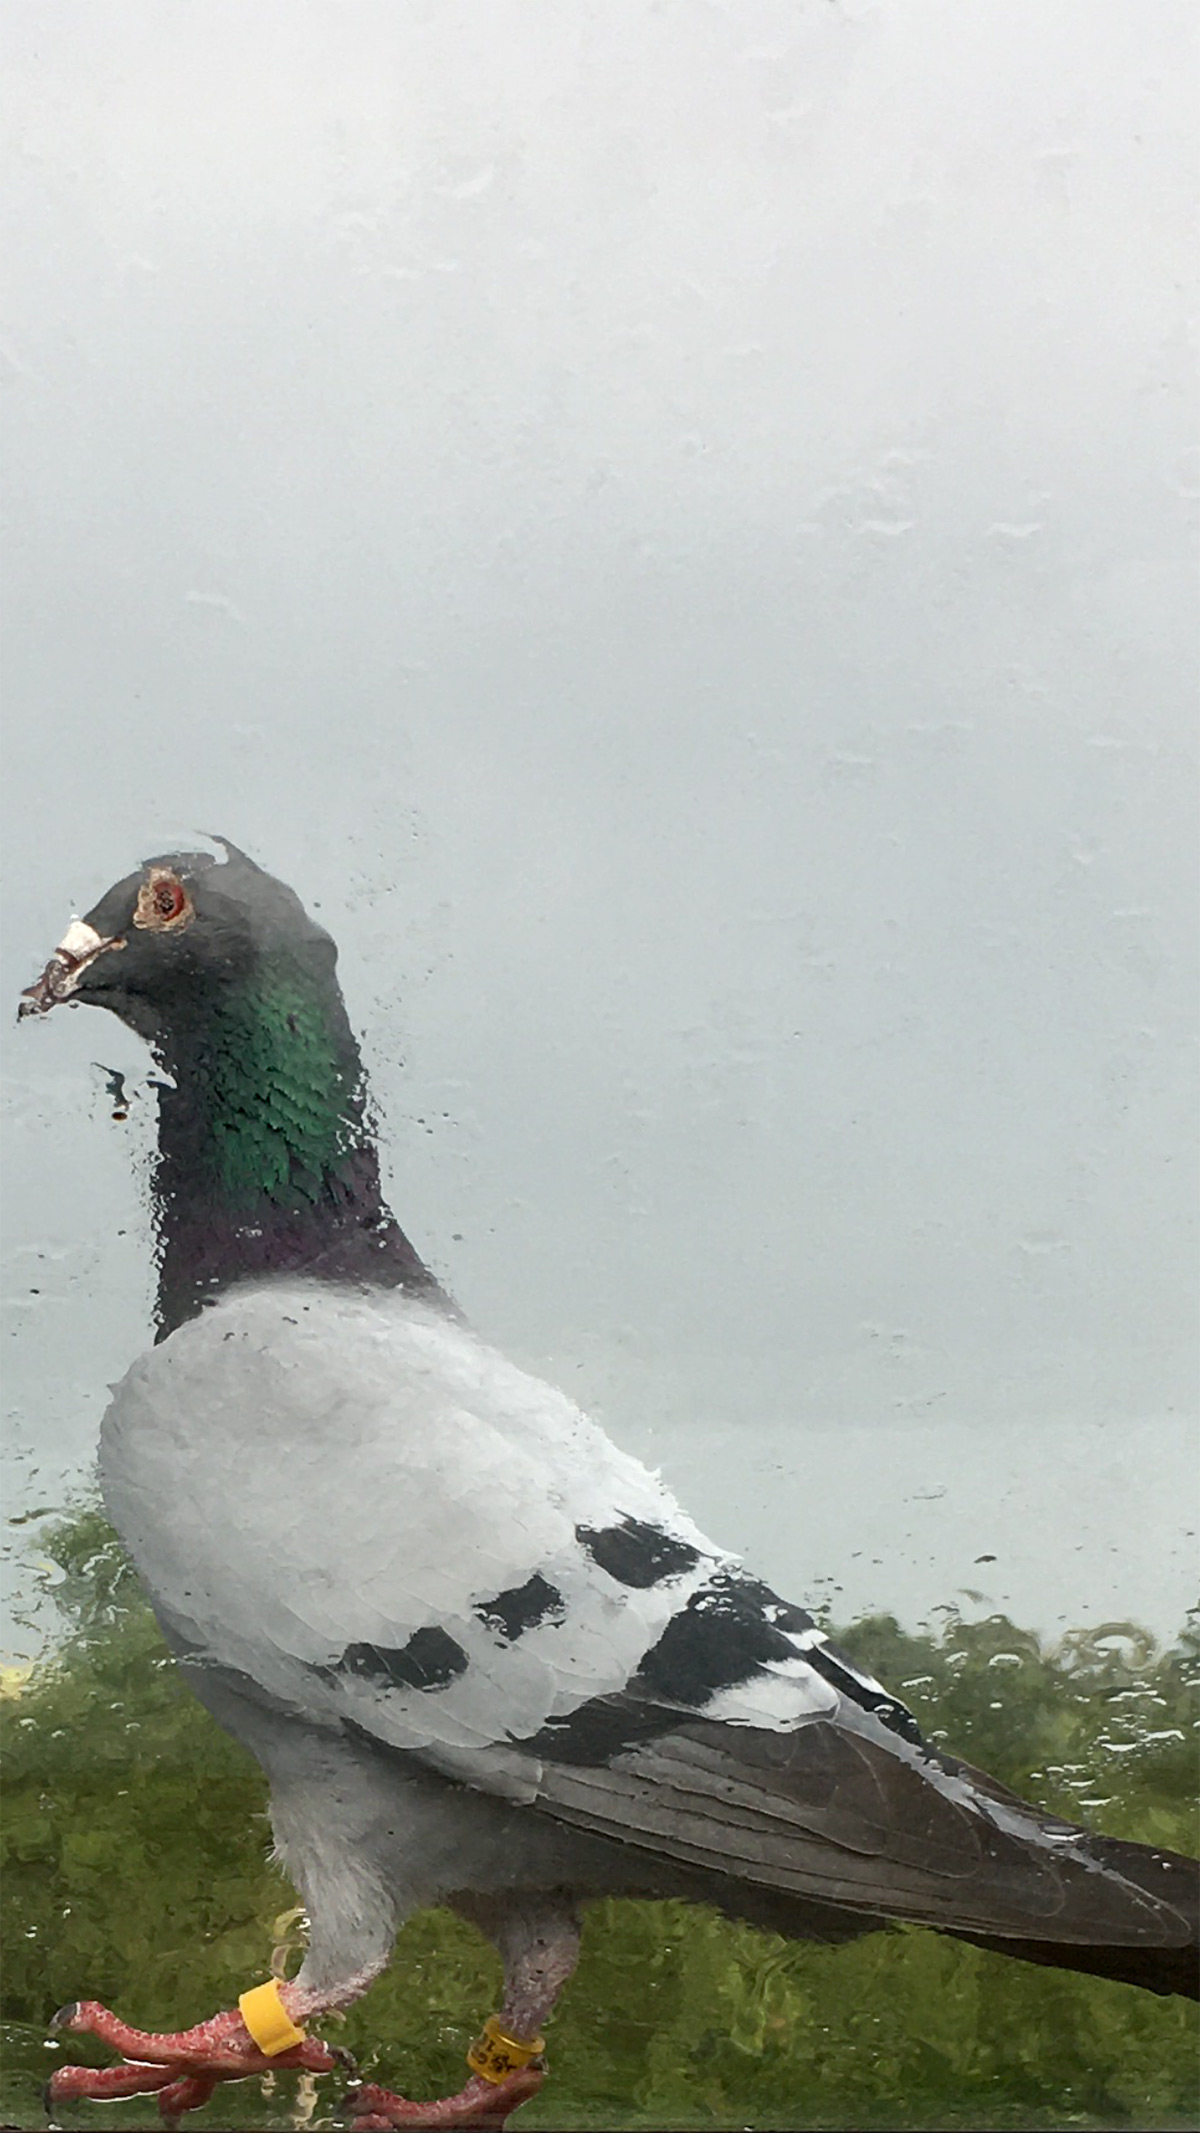 Pigeon through rainy window - Picture of a racing pigeon sat on a rainy window - photo by gavstretchy